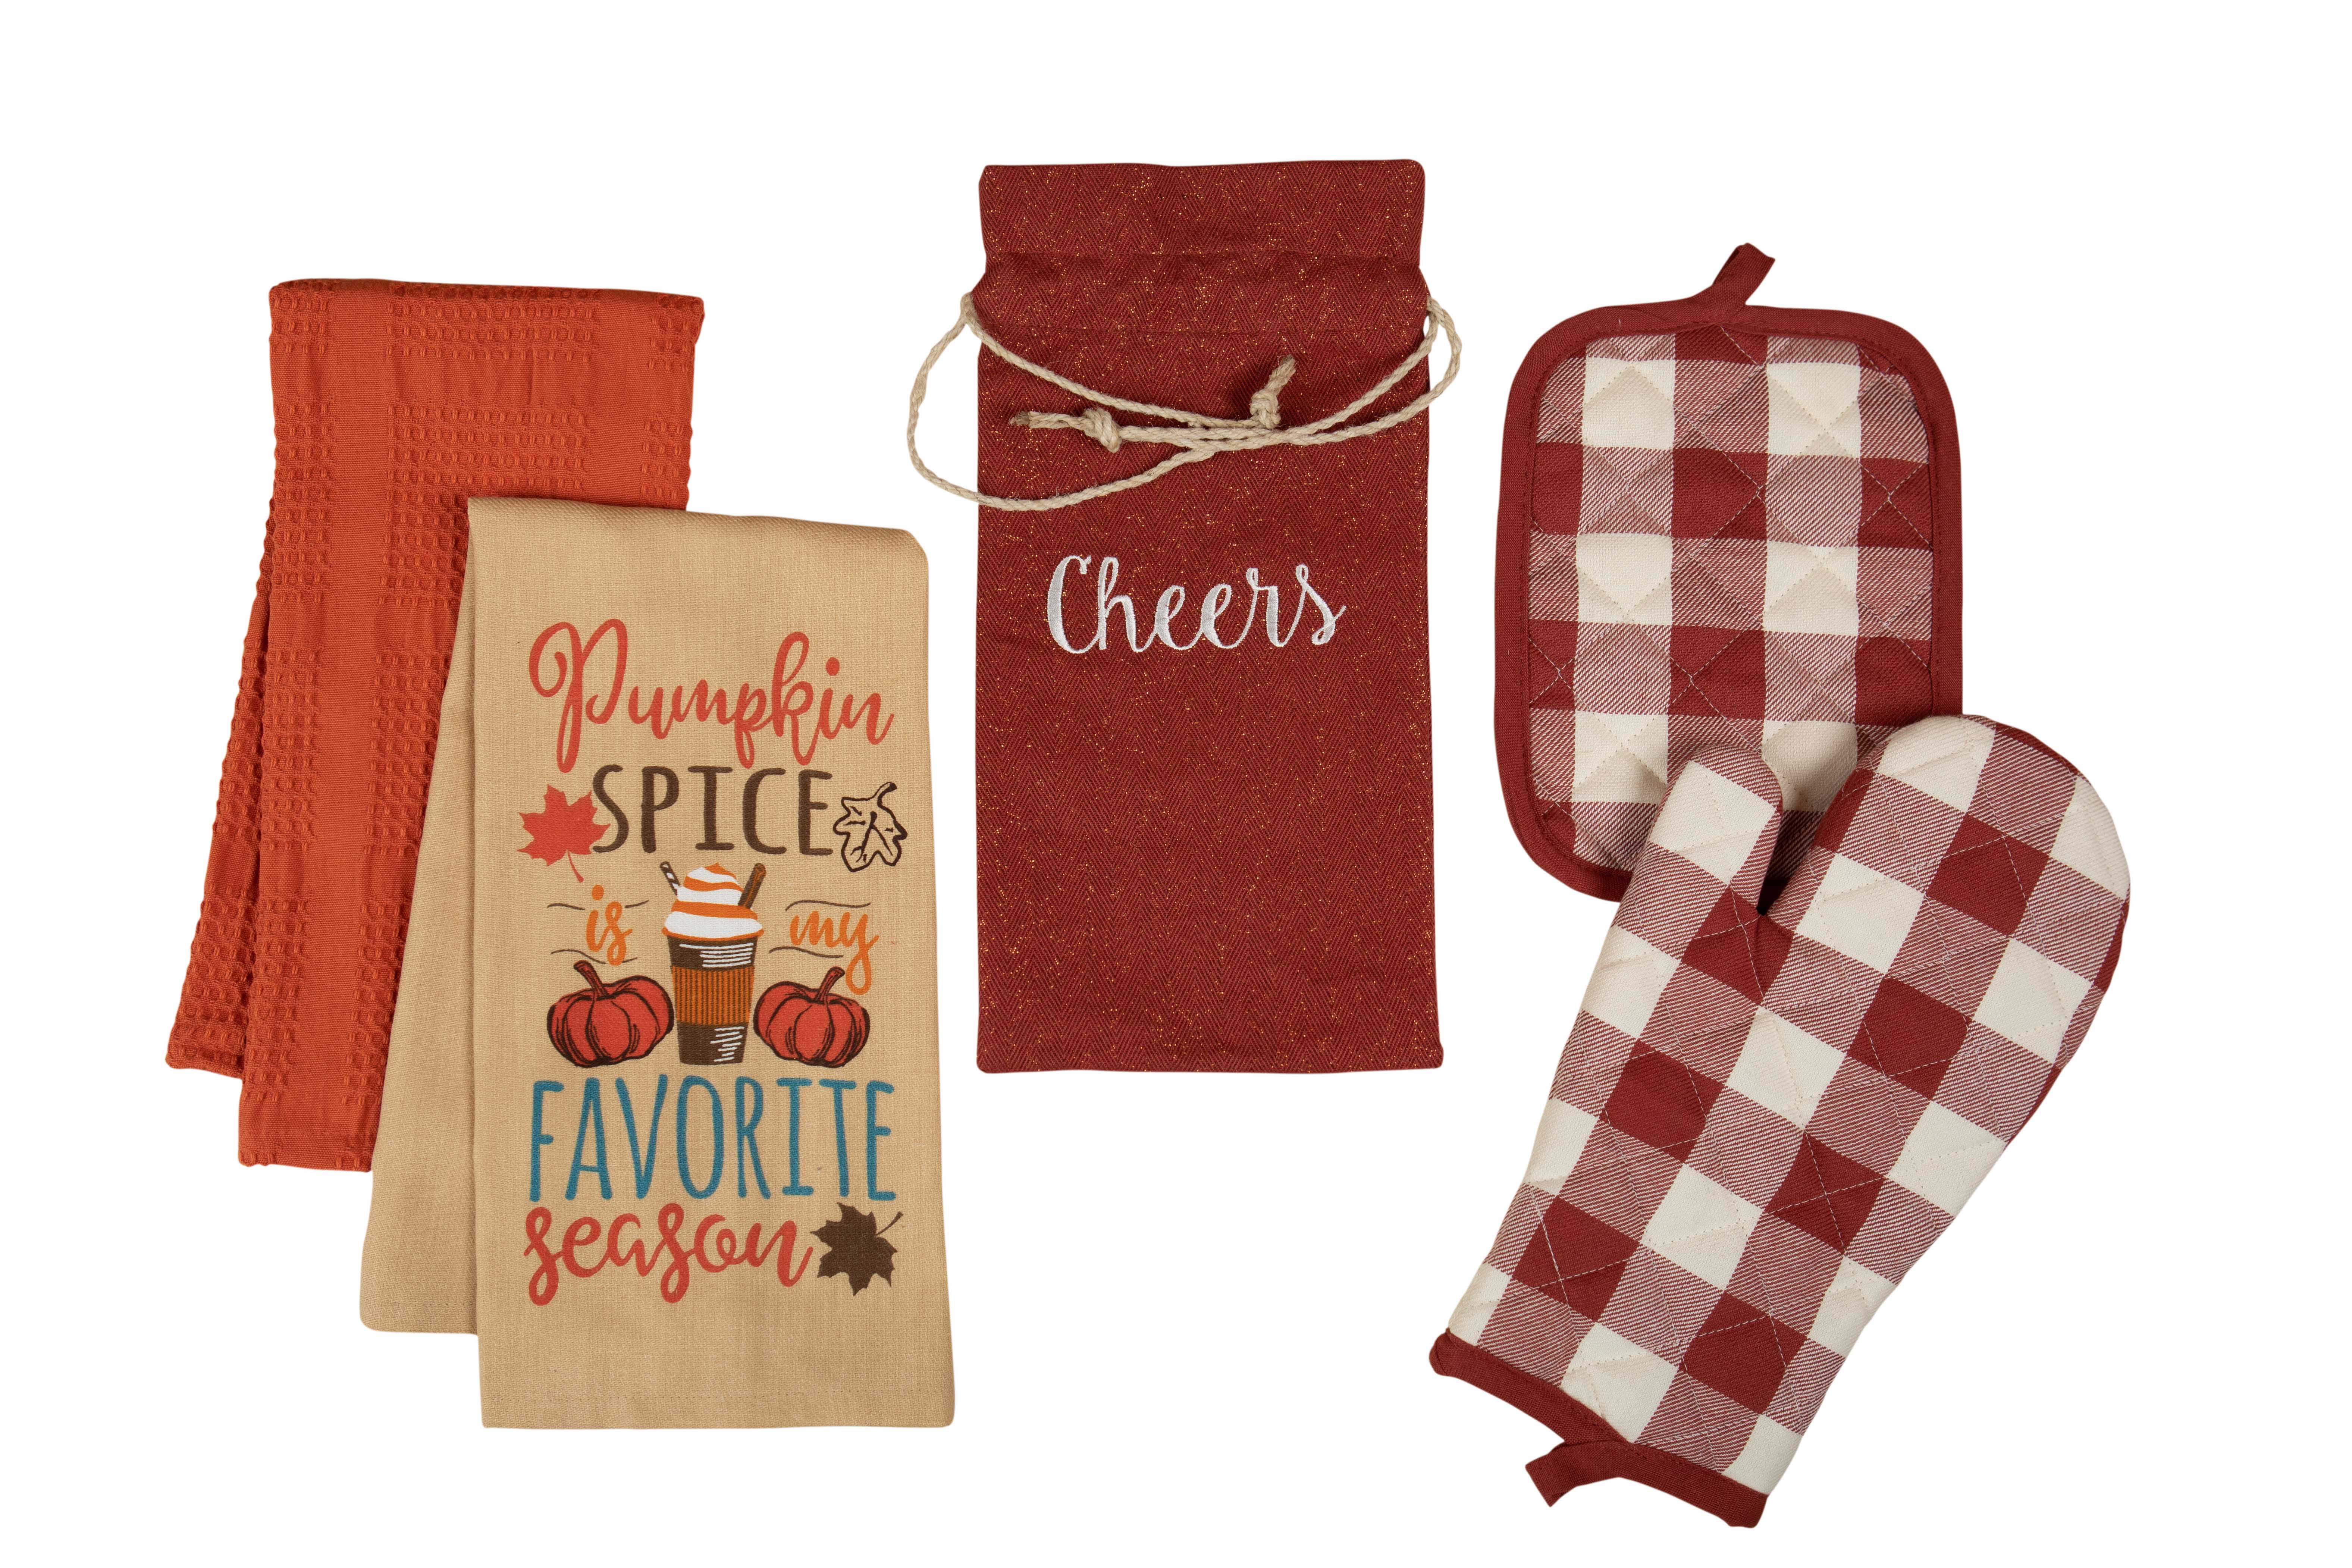 Kitchen Gift Set - Dish Towels, Pot Holders, and Oven Mitts (Kitchen Clip  Art - - 2 Towels, 1 Oven Mitt, 1 Pot Holder)